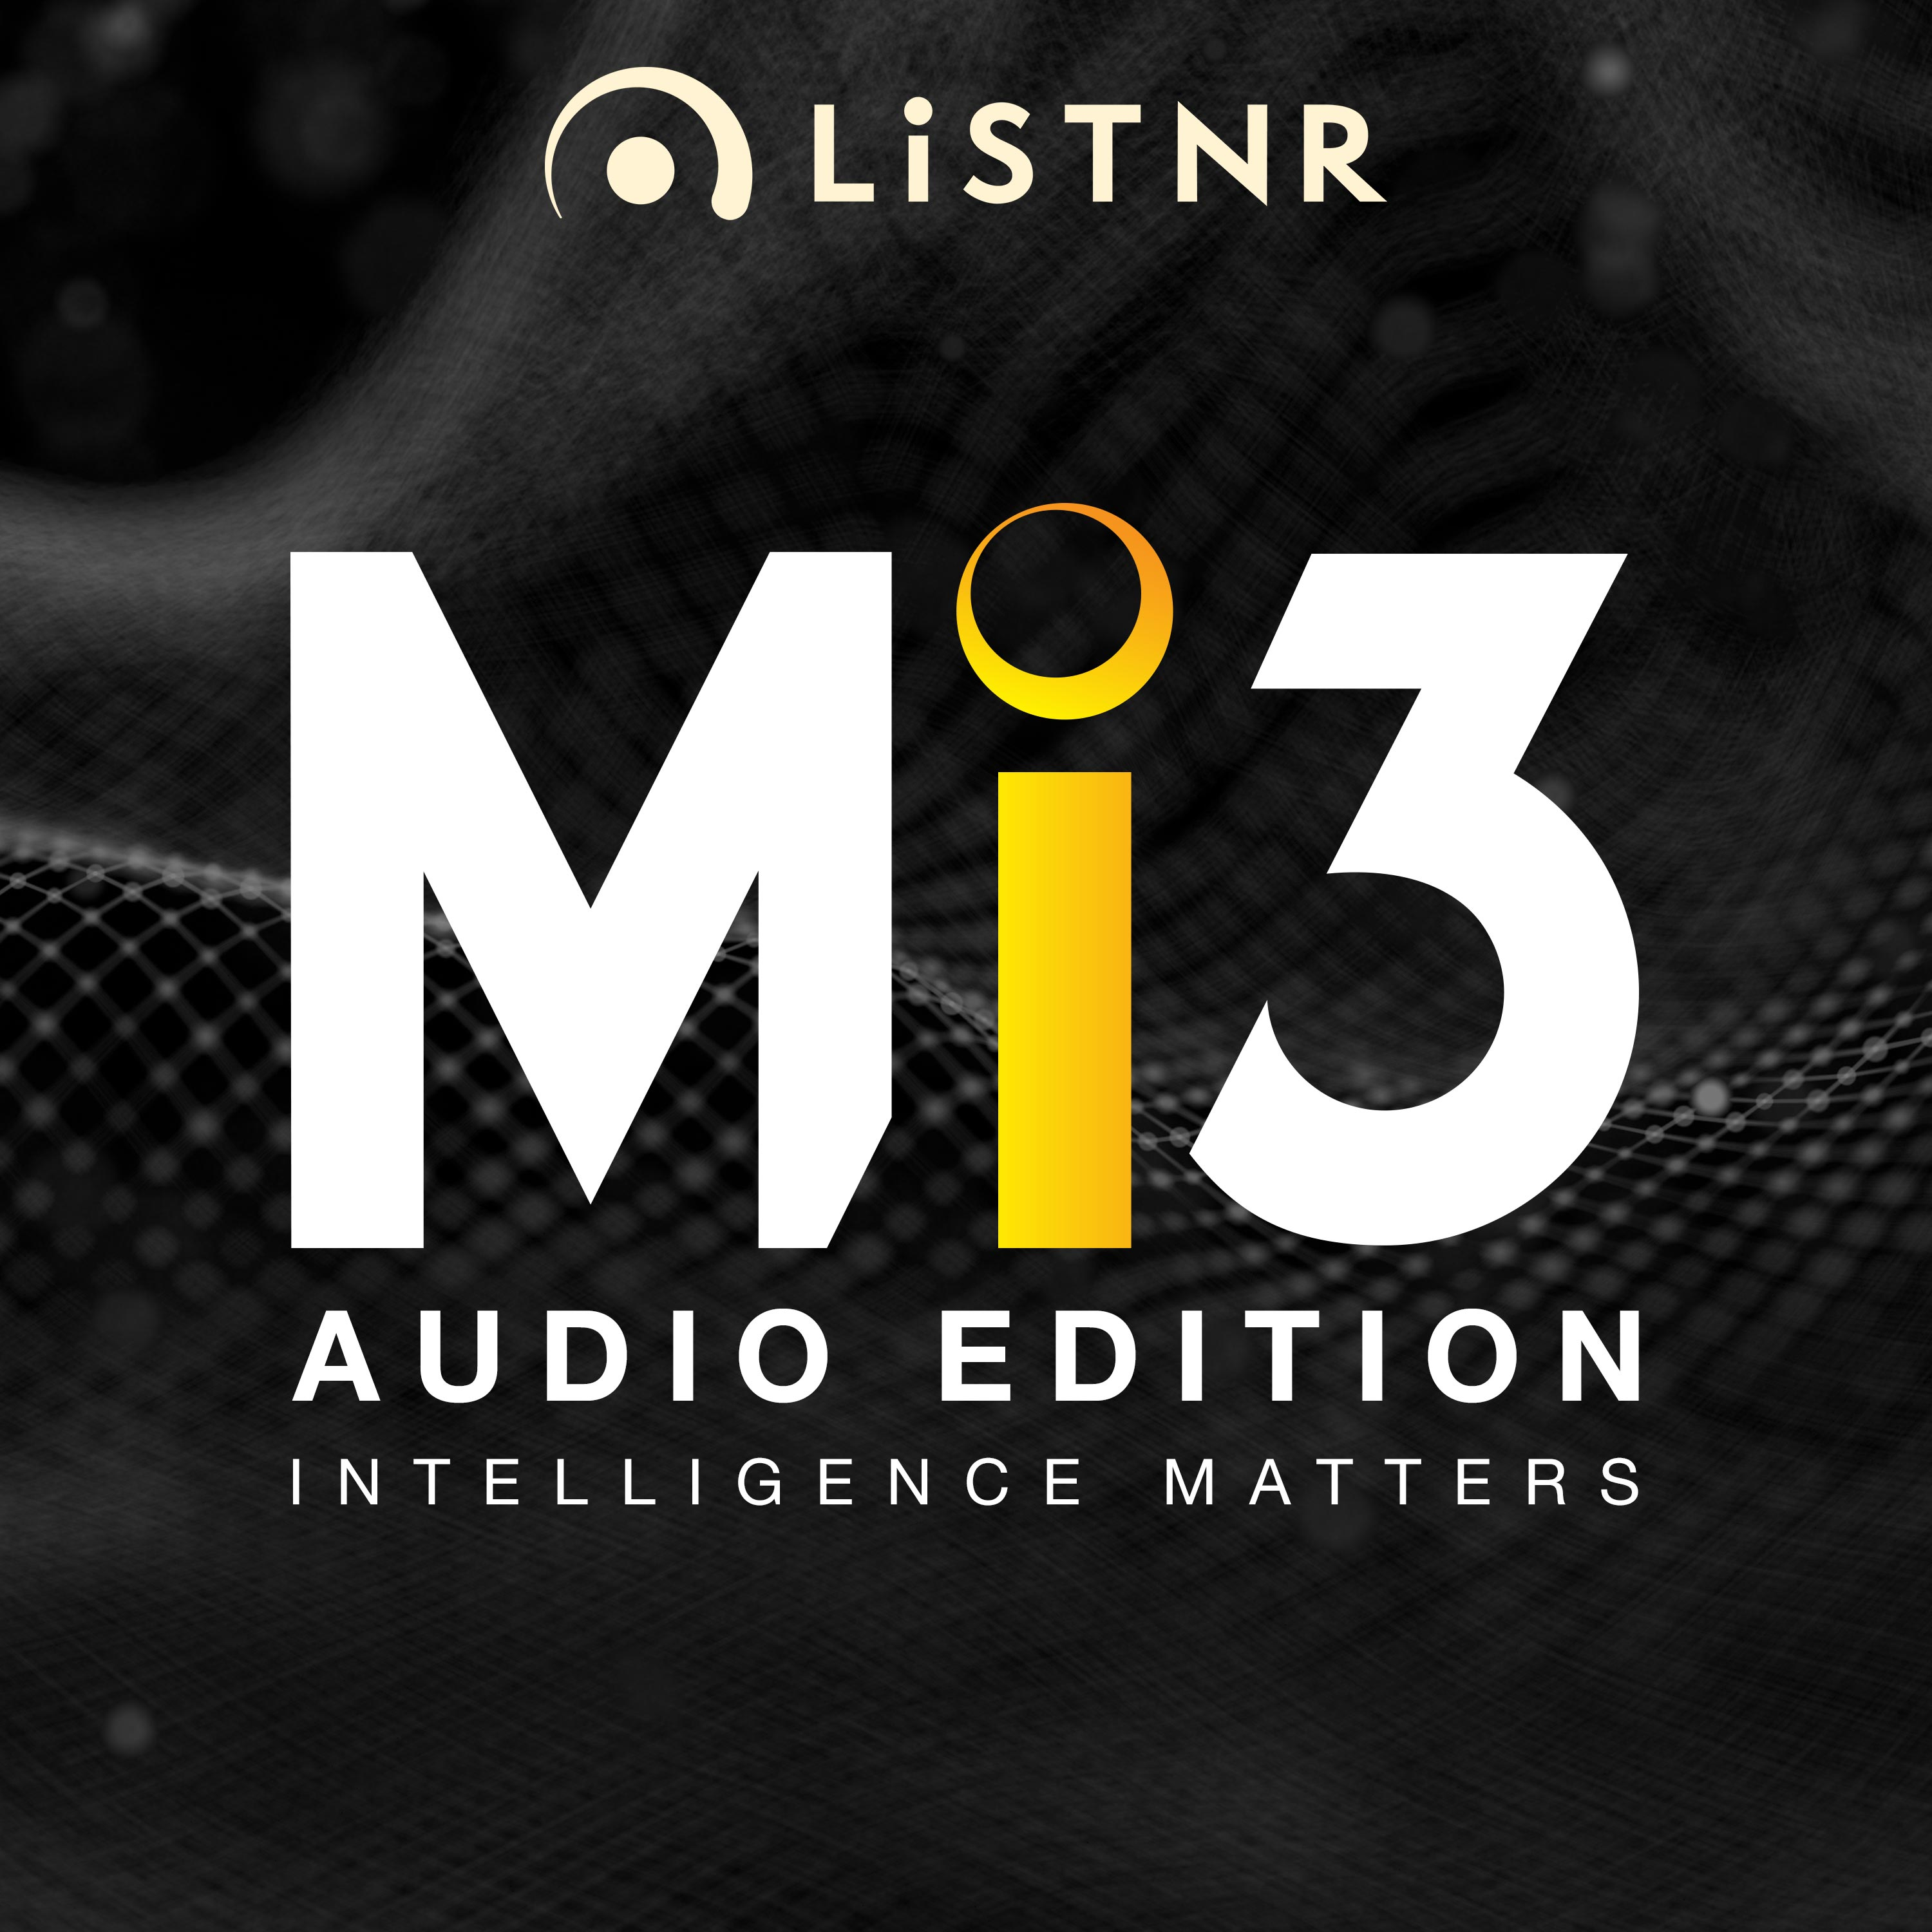 Mi3 goes all-in on AI-powered Fast News and CustomerX launches; Capgemini, Coles 360, Salesforce, ThinkNewsBrands back initiatives - and unpack the market challenges coming...fast